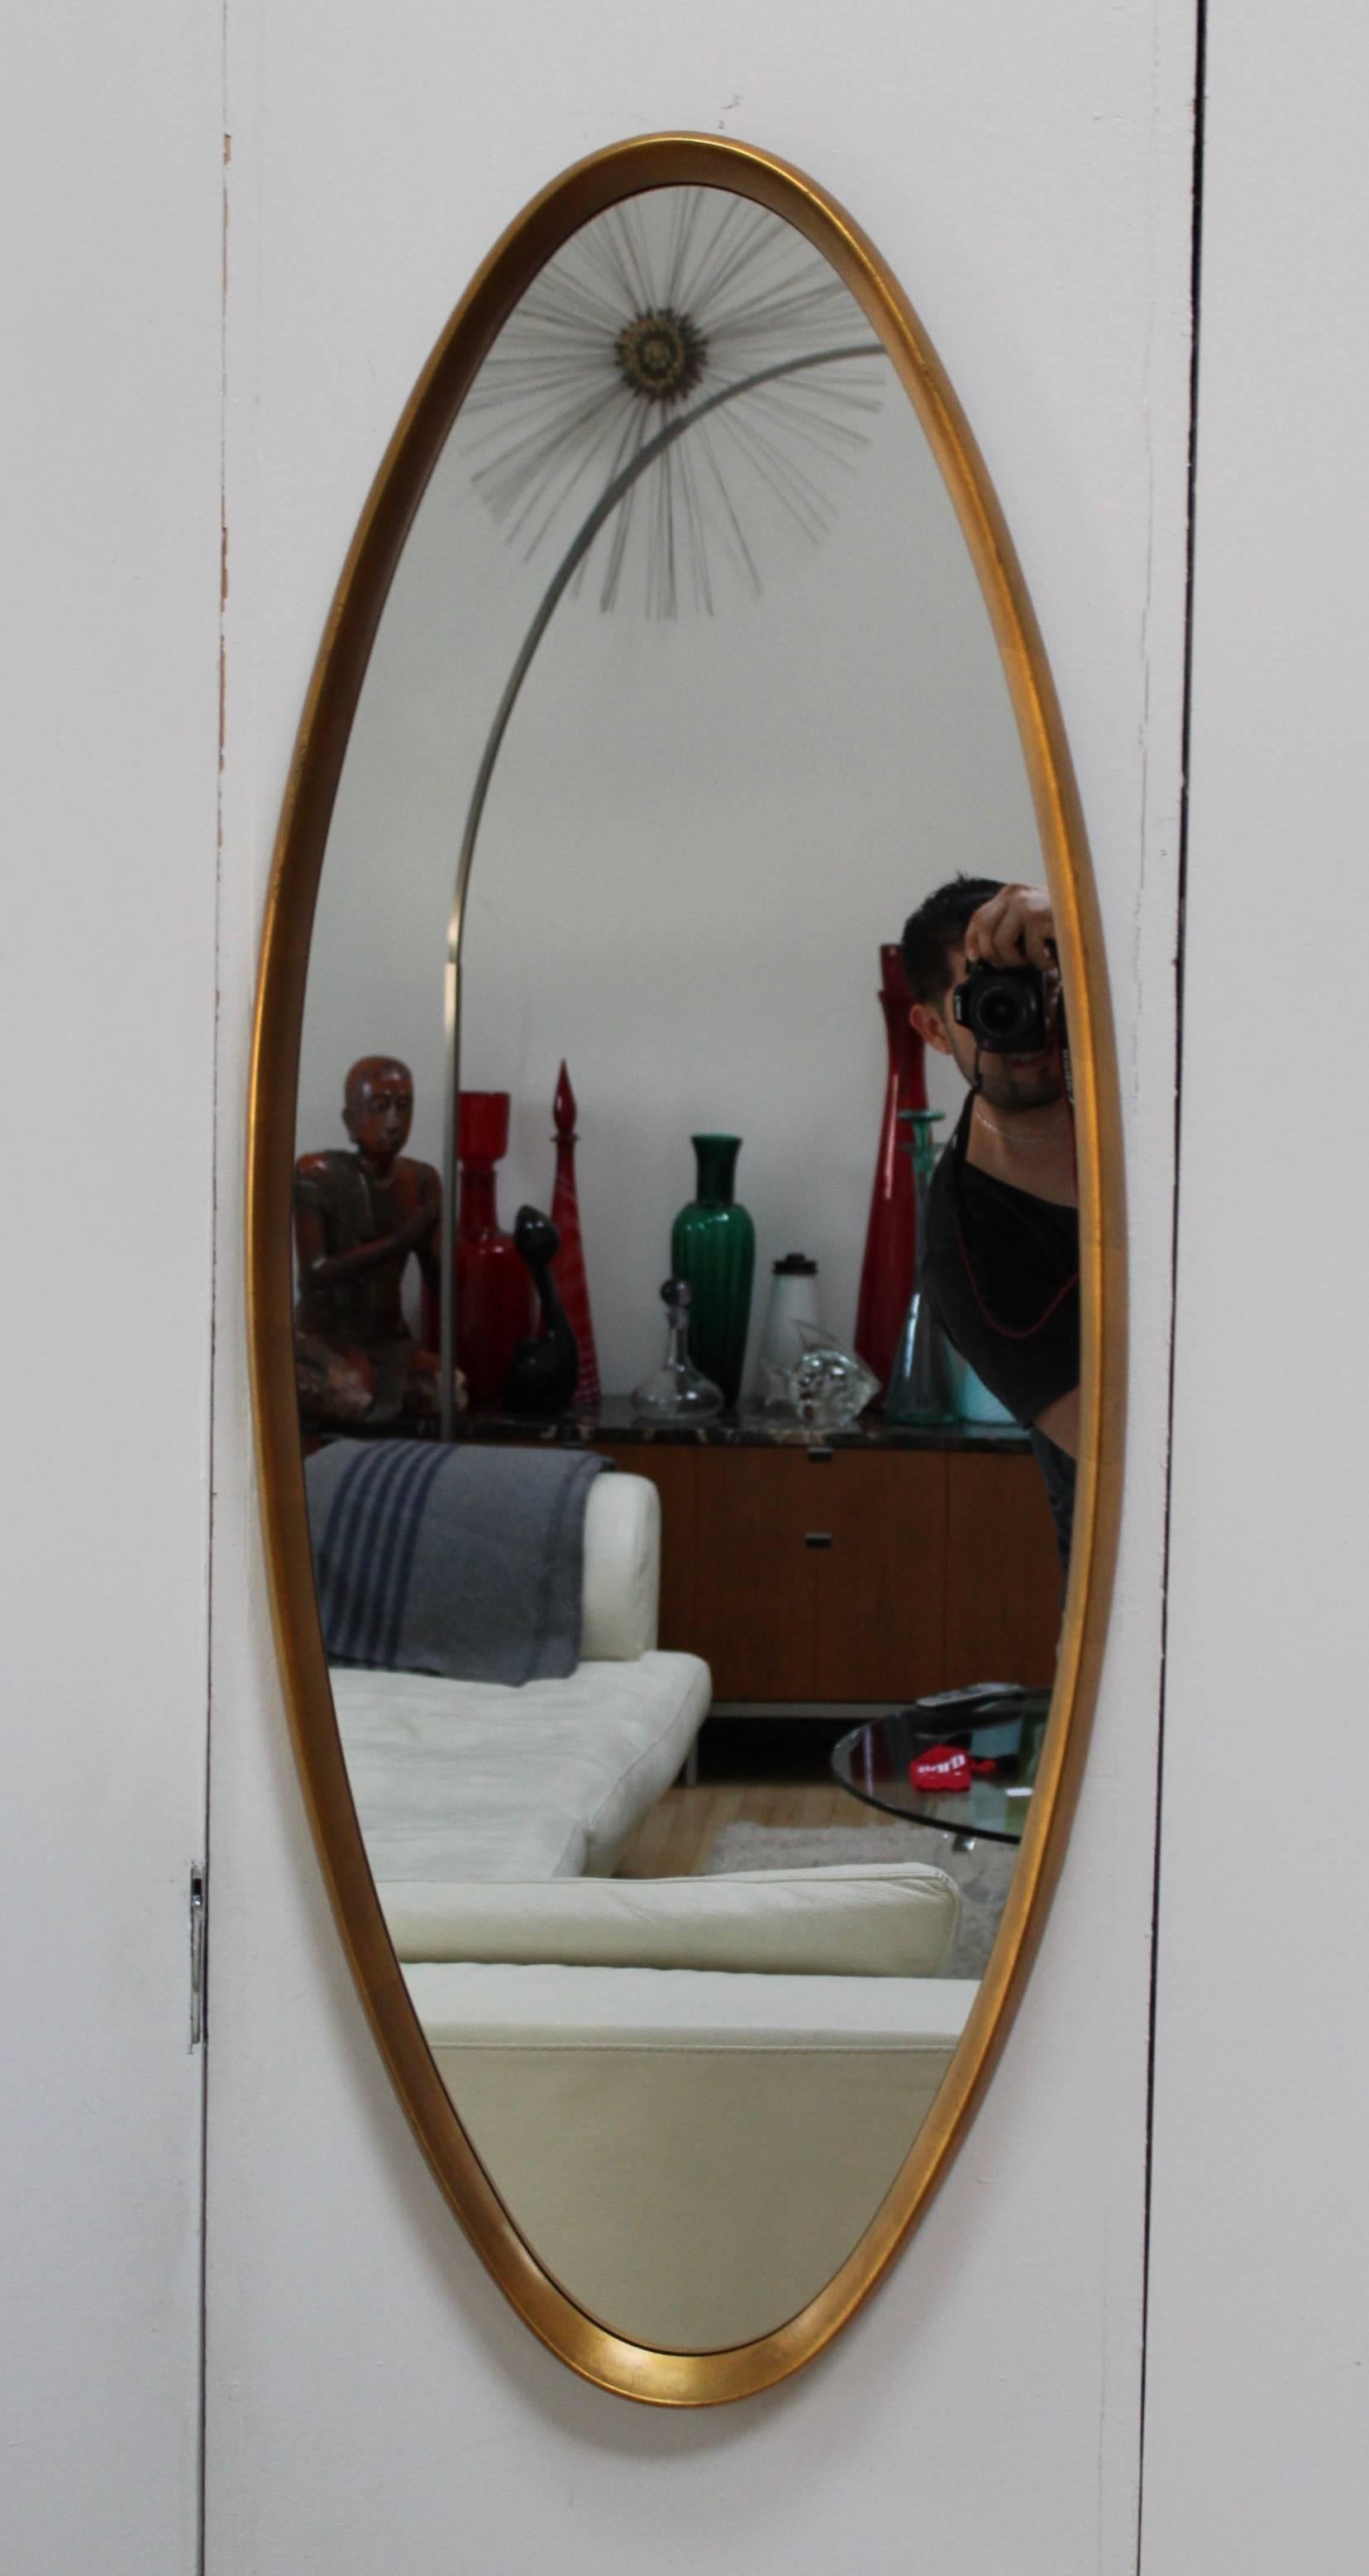 Stunning, 1950s La Barge style gold leaf modern oval mirror.

Two available price is for each.